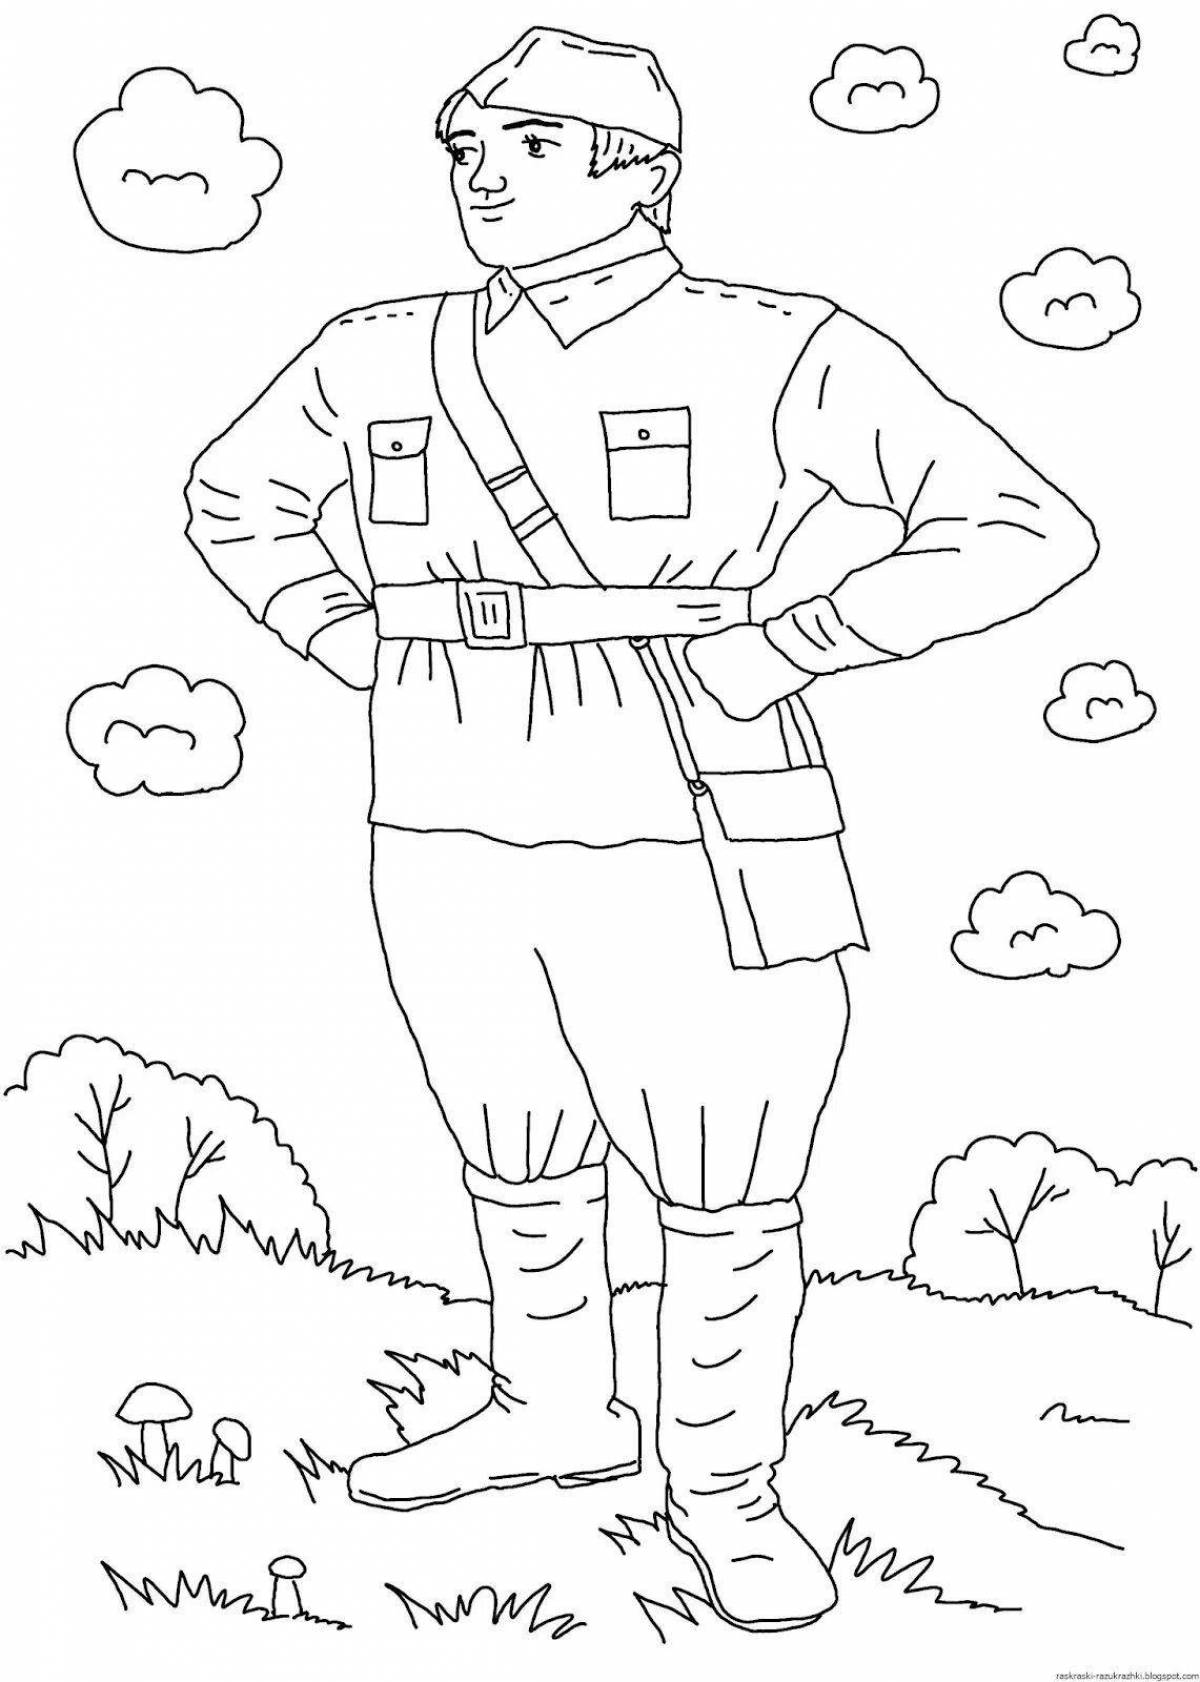 Bright soldier coloring page 23 February